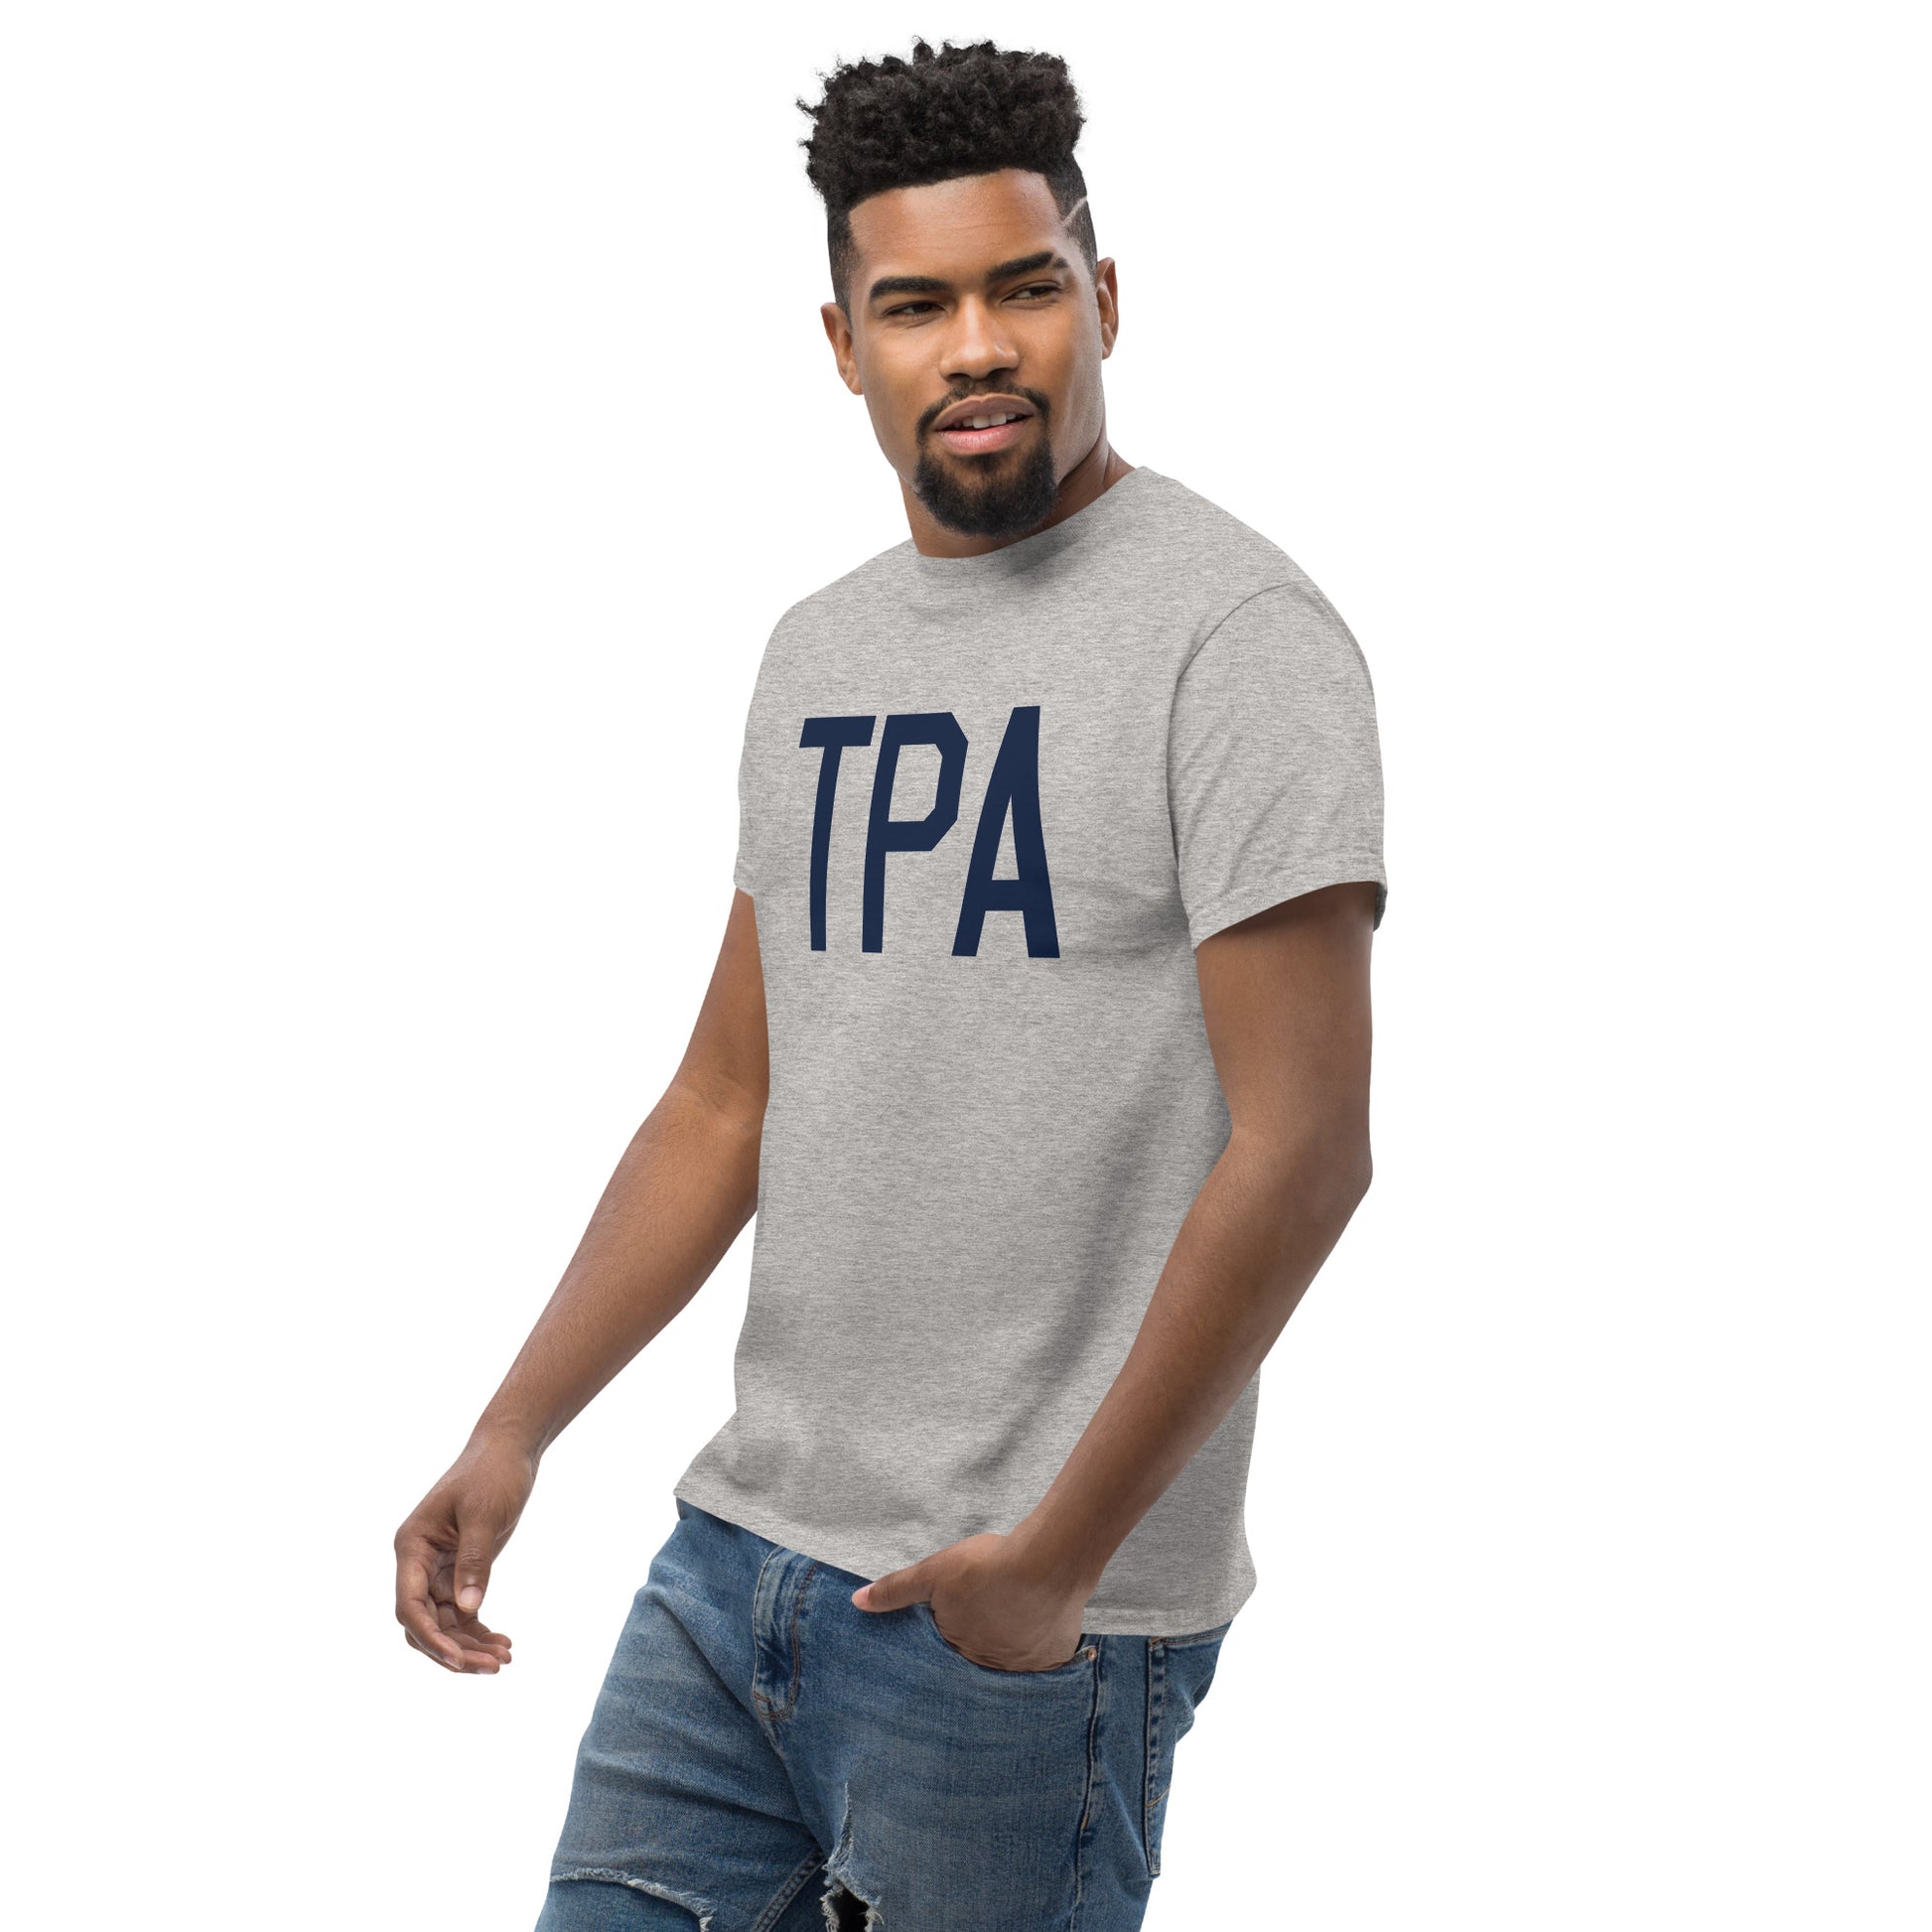 Aviation-Theme Men's T-Shirt - Navy Blue Graphic • TPA Tampa • YHM Designs - Image 07